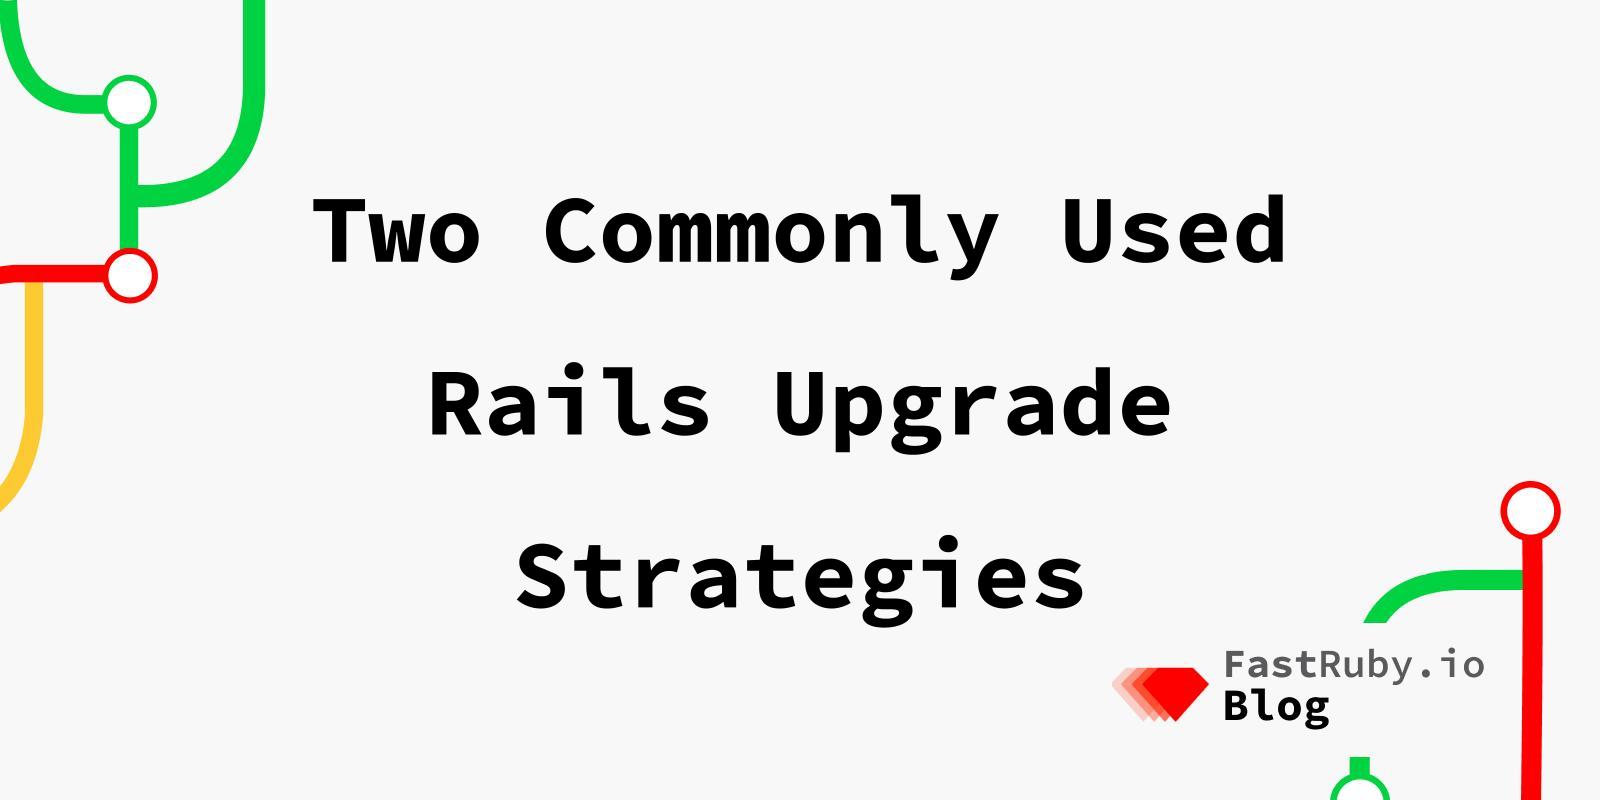 Two Commonly Used Rails Upgrade Strategies